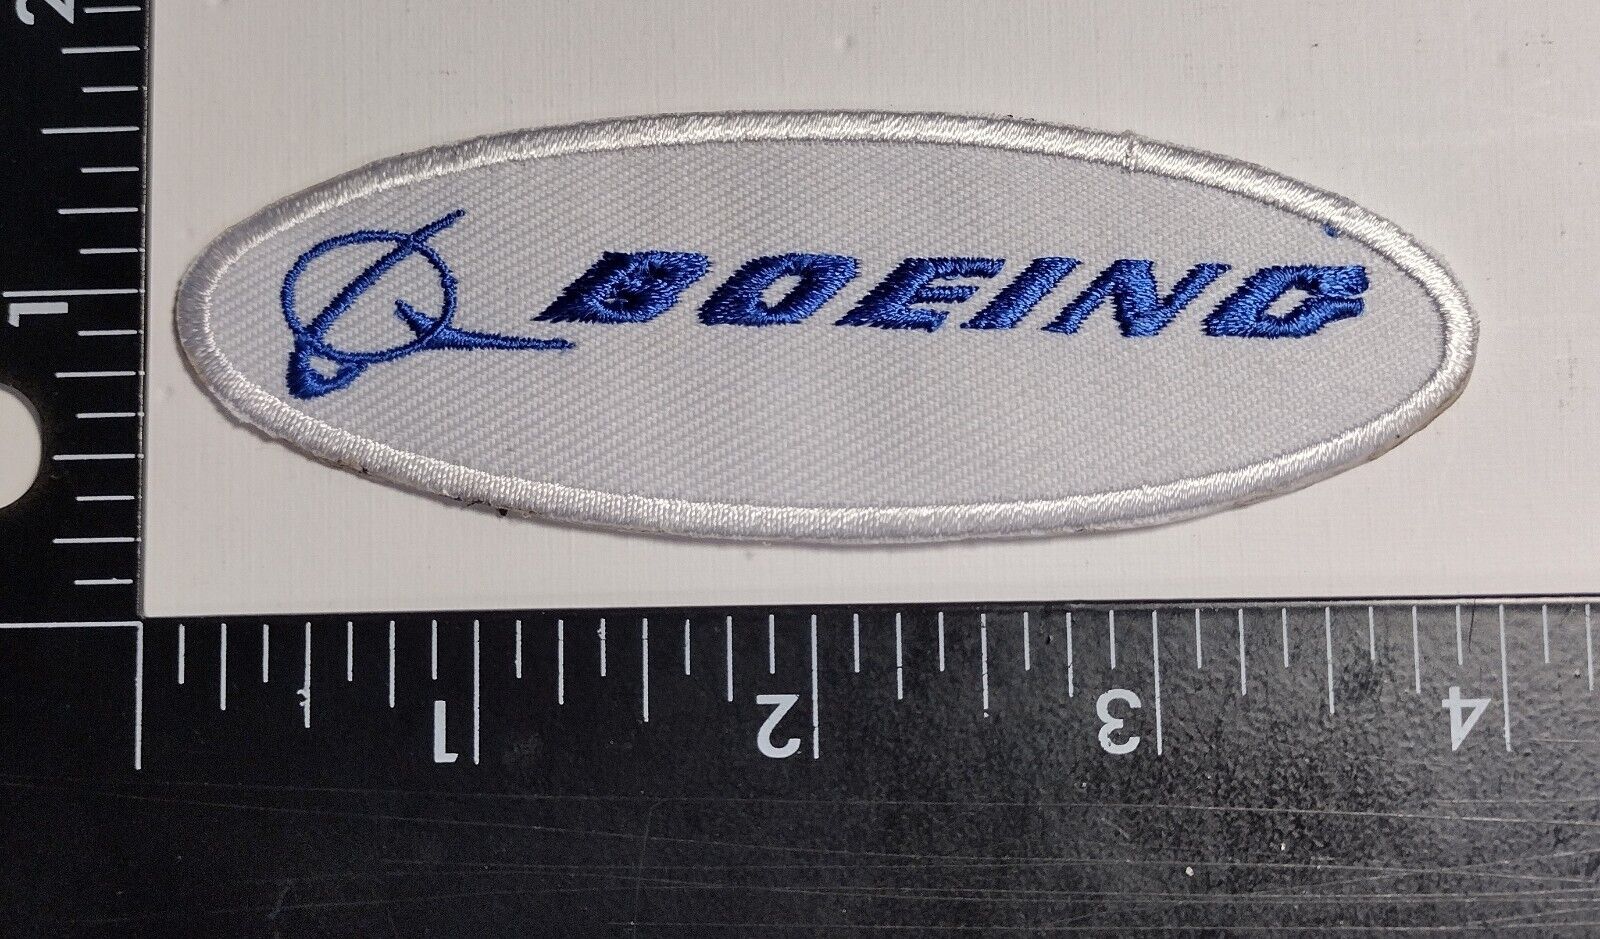 Boeing Patch Tage Name  sew or iron High Quality Embroidery Fast Shipping W/TRK#